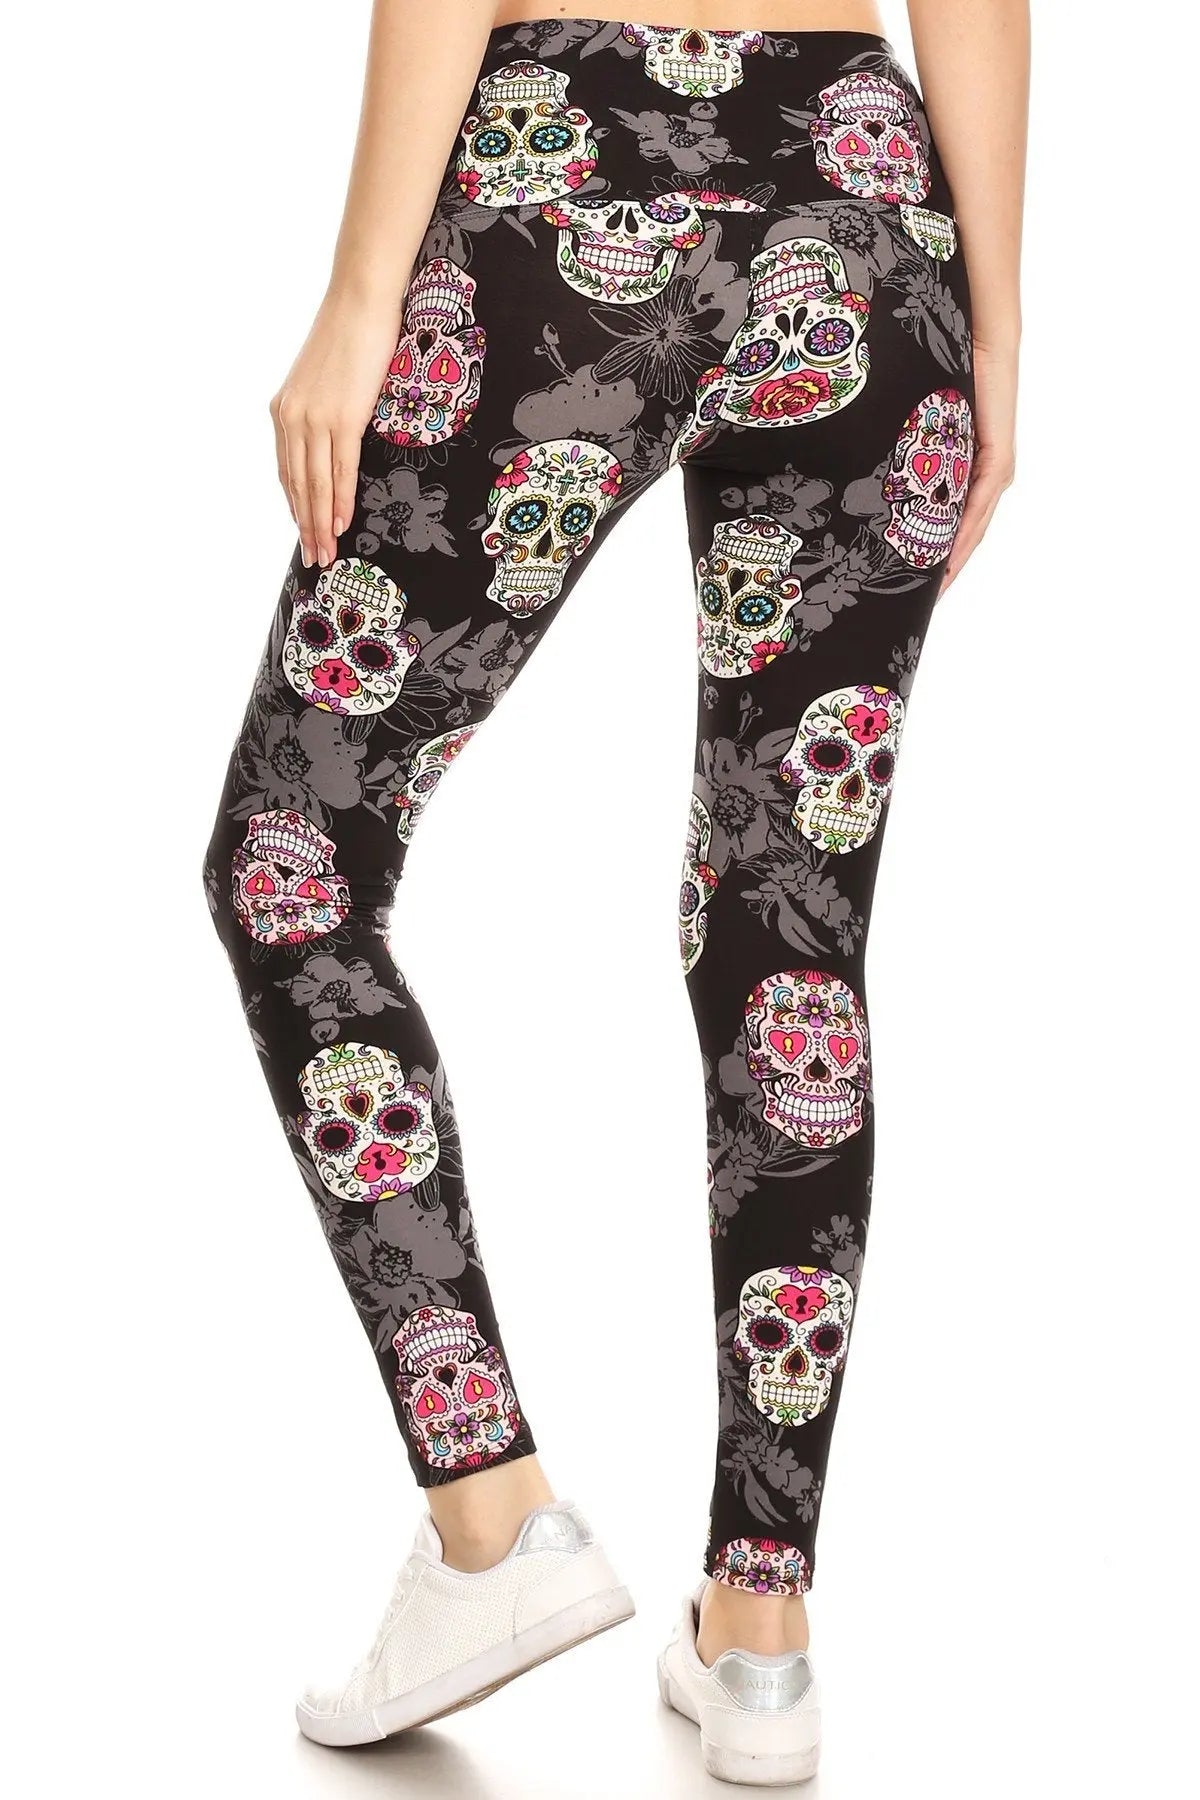 5-inch Long Yoga Style Banded Lined Skull Printed Knit Legging With High Waist Sunny EvE Fashion